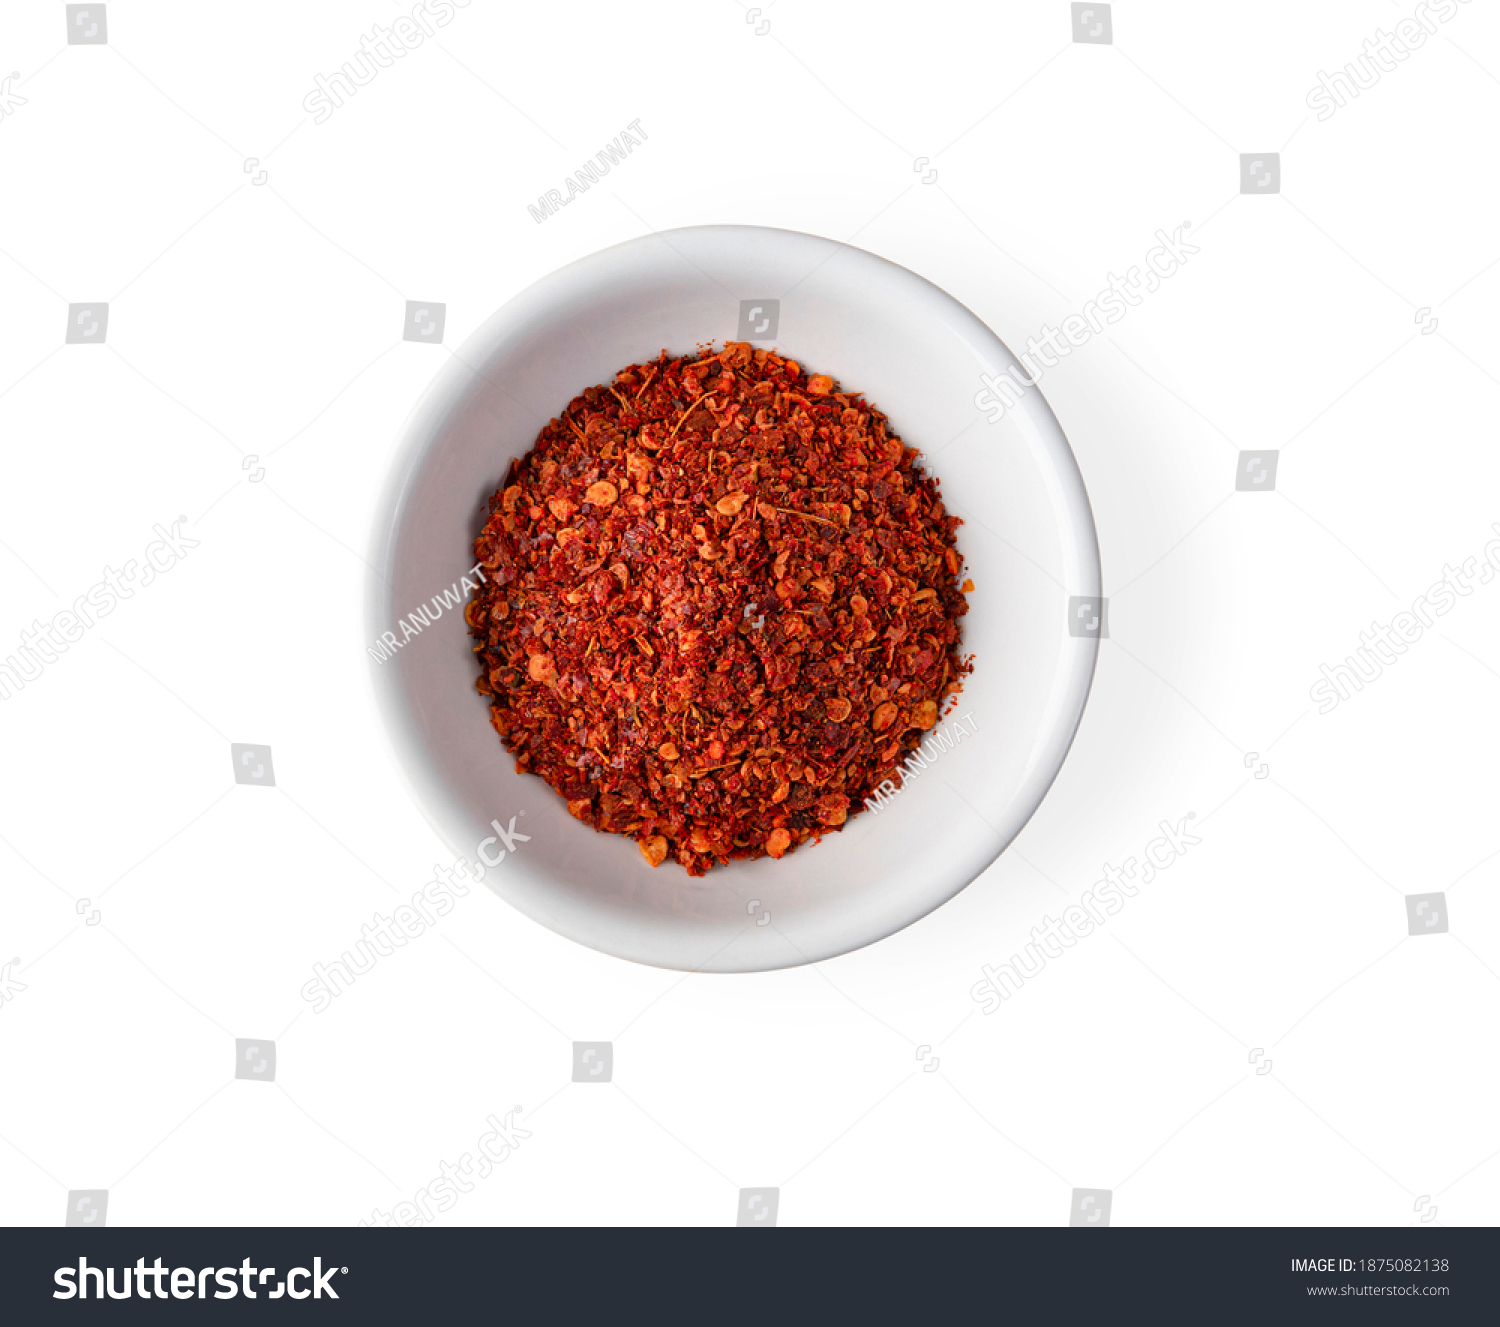 Cayenne pepper in a cup isolated on white background. Top view #1875082138